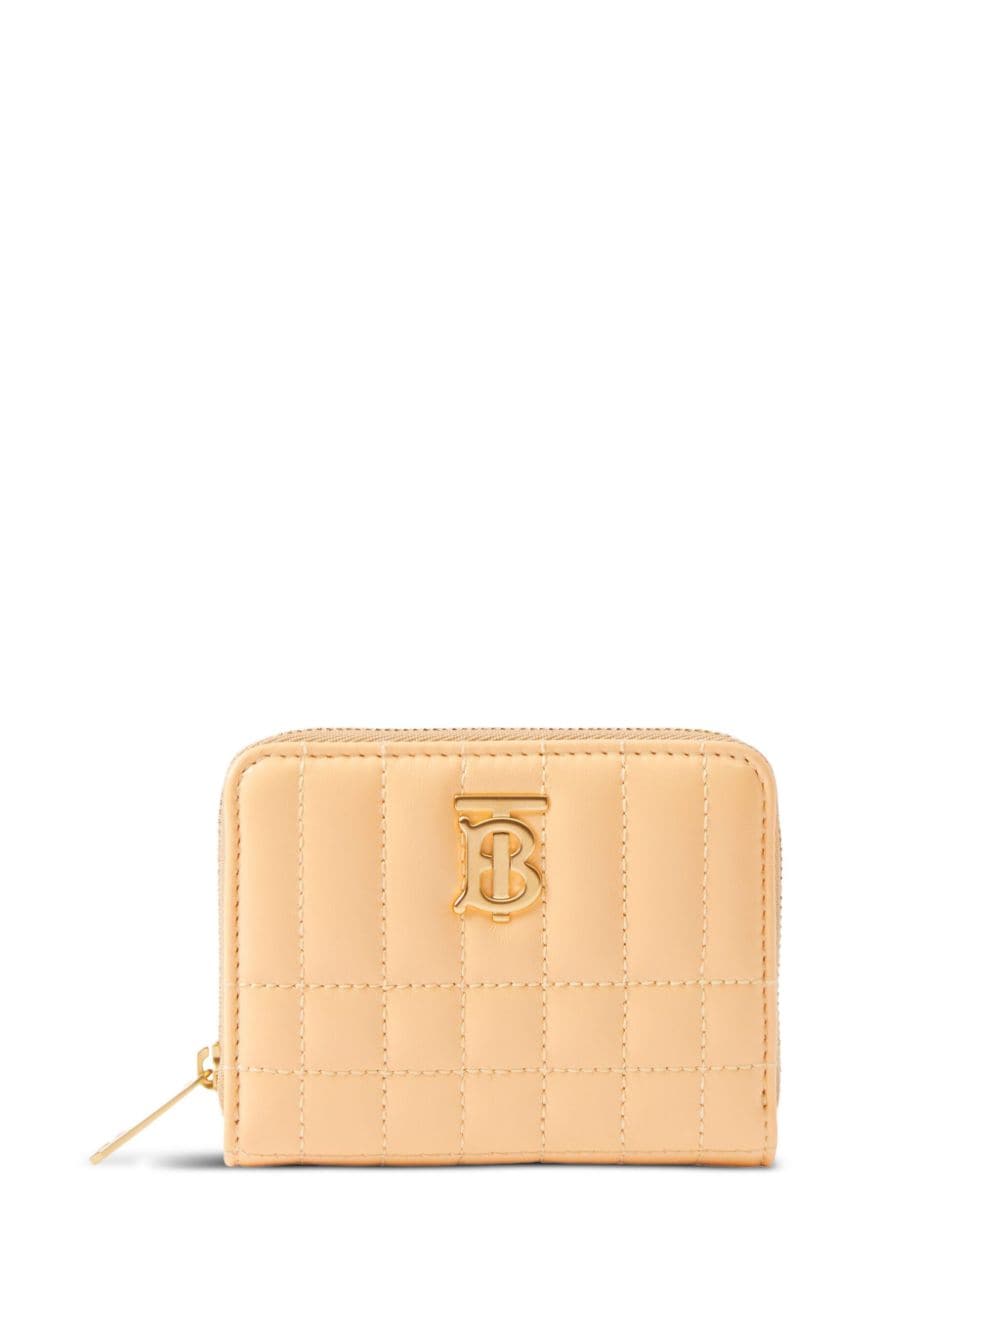 Burberry Lola quilted leather wallet - Neutrals von Burberry